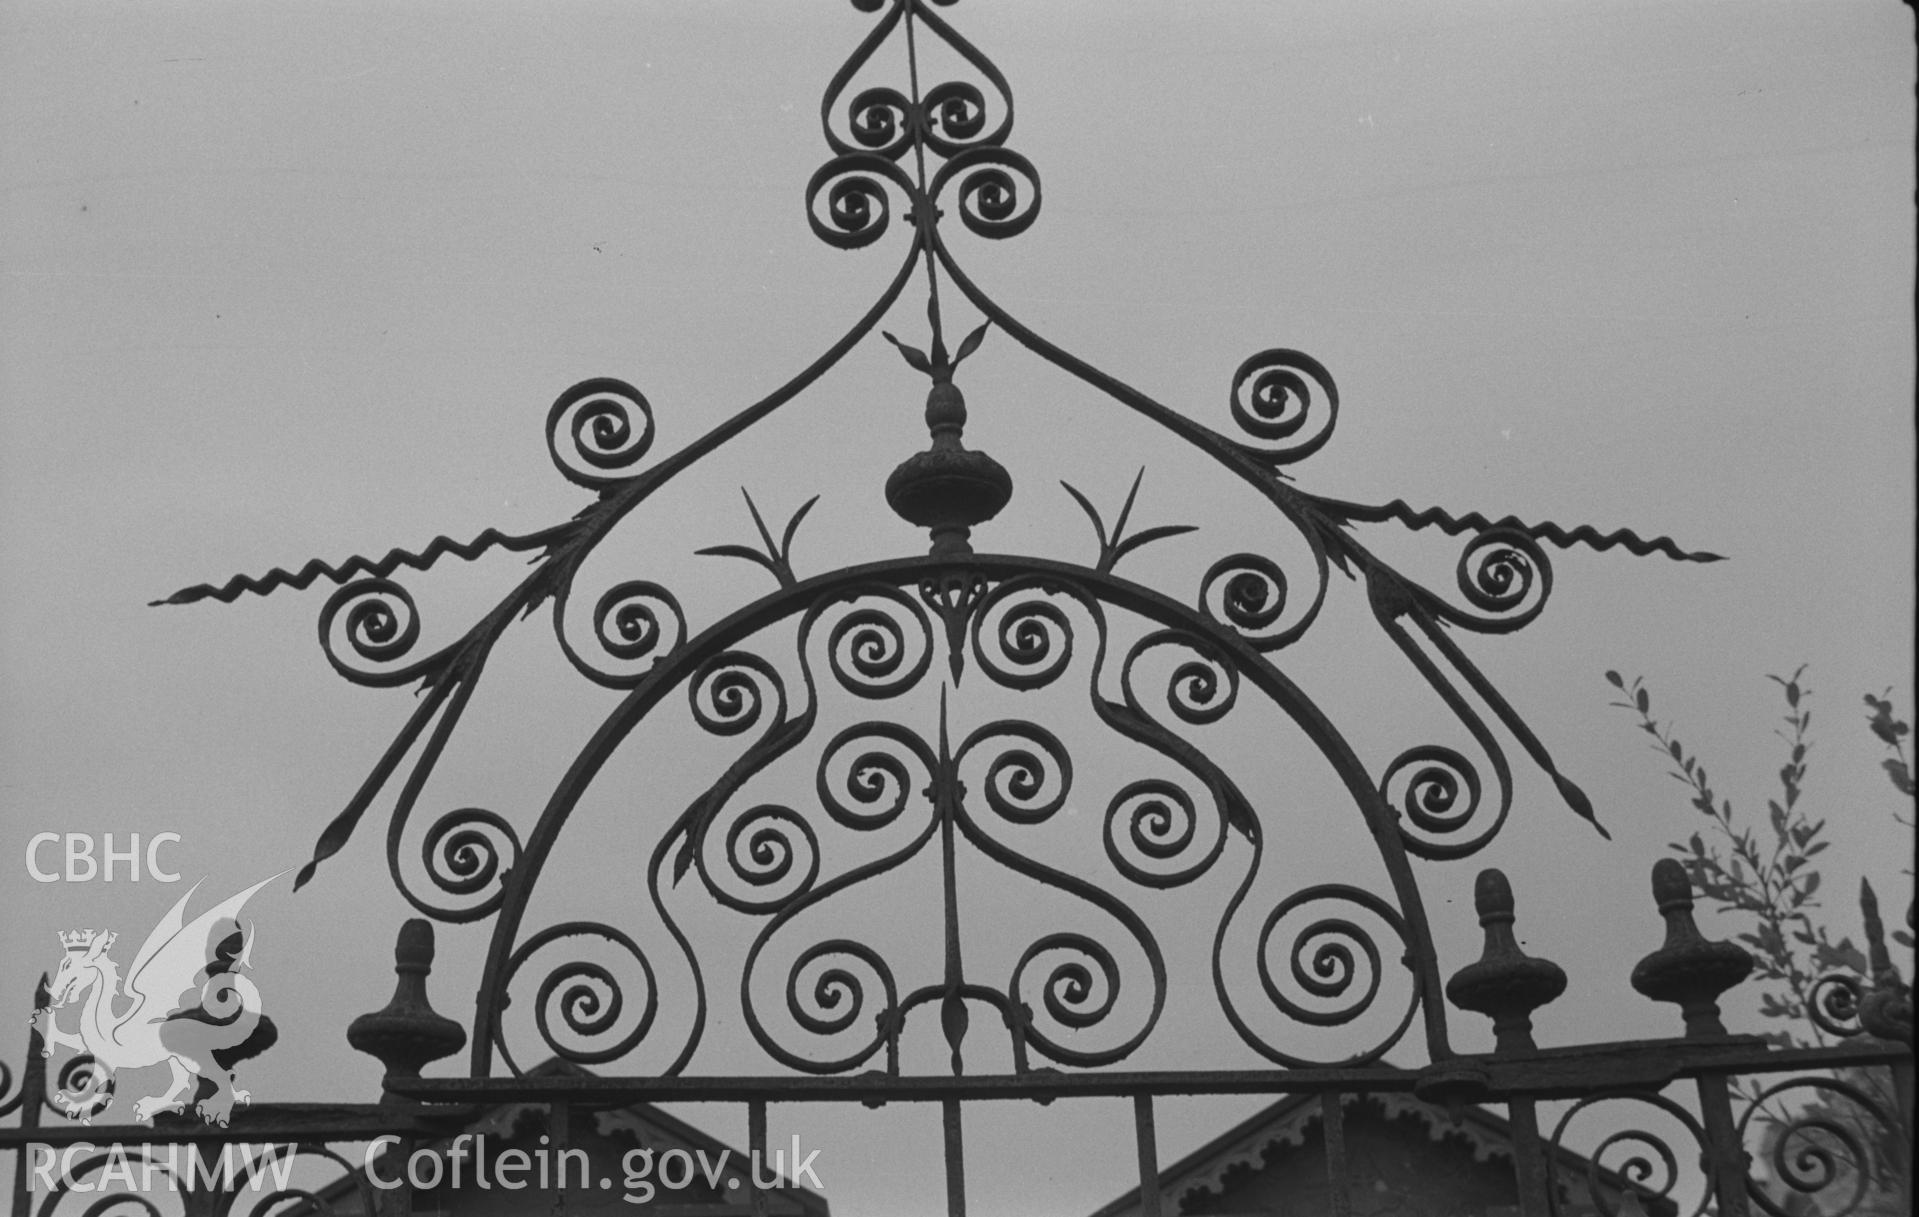 Digital copy of a black and white negative showing view of wrought iron gates at Capel Pant-y-Defaid Welsh Unitarian chapel, Pren-Gwyn, Llandysul. Photographed by Arthur O. Chater in September 1966.